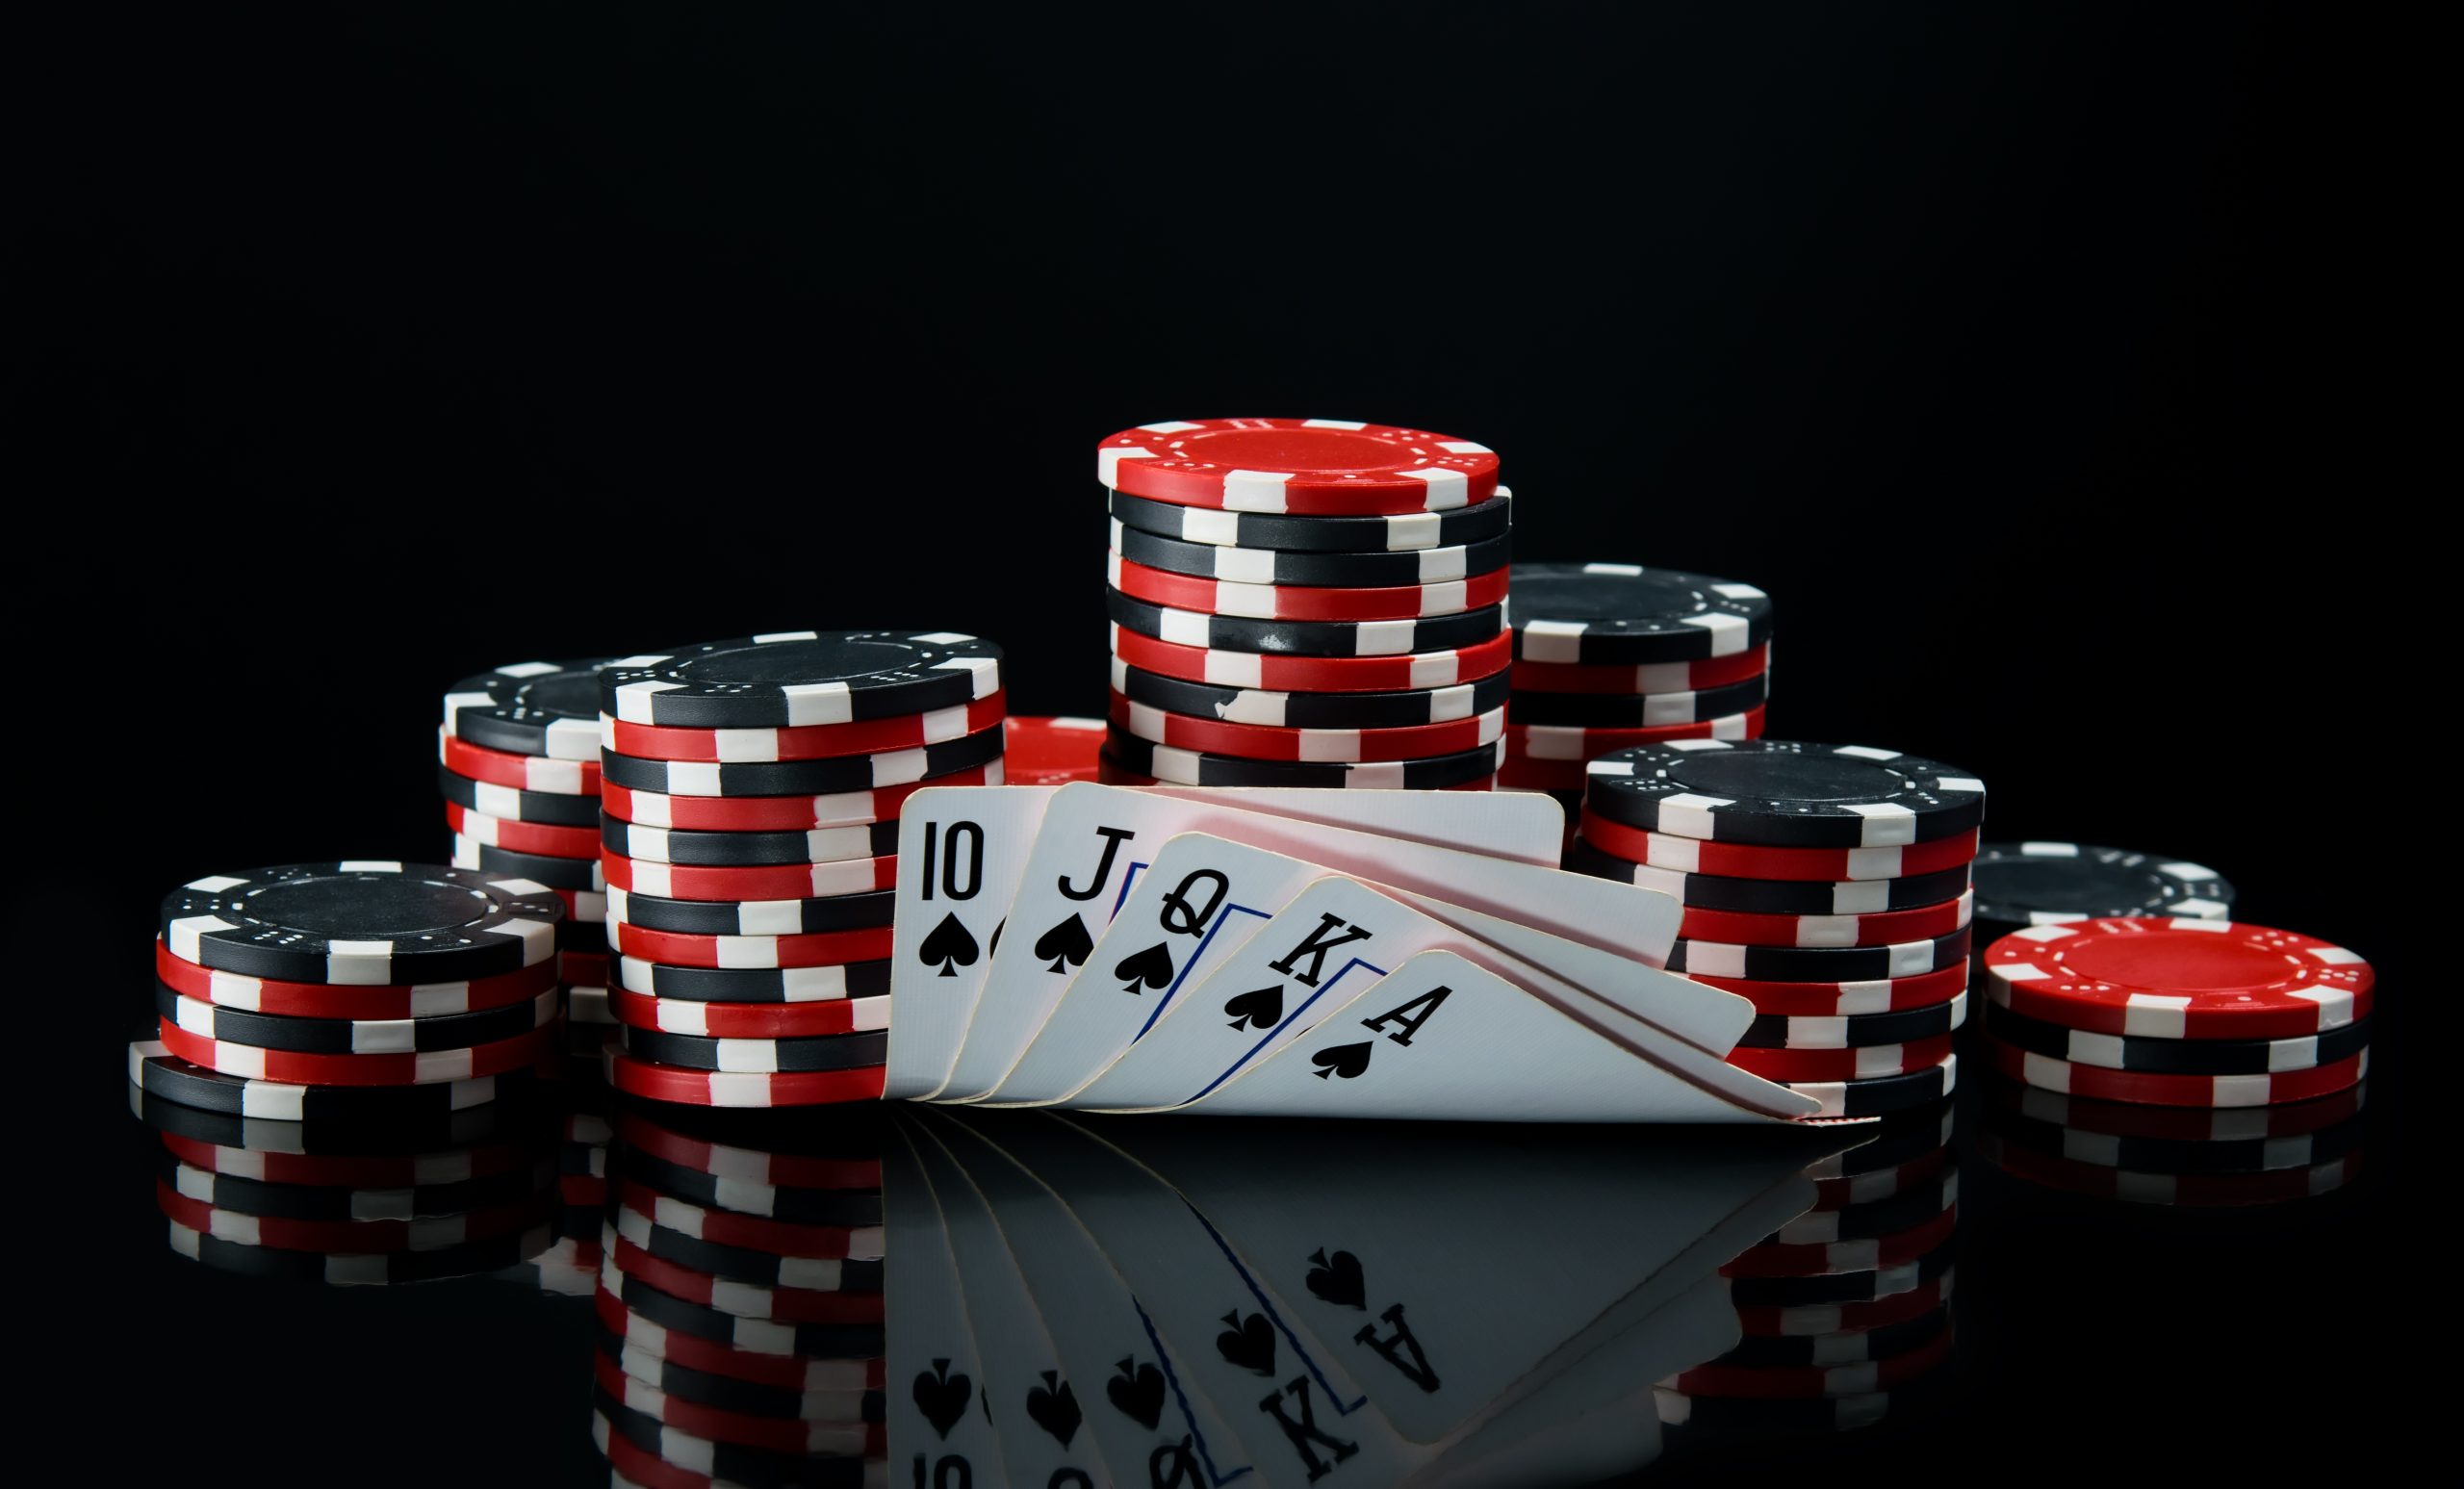 From Beginner to Pro: Steps for Advancing Your Online Poker Game